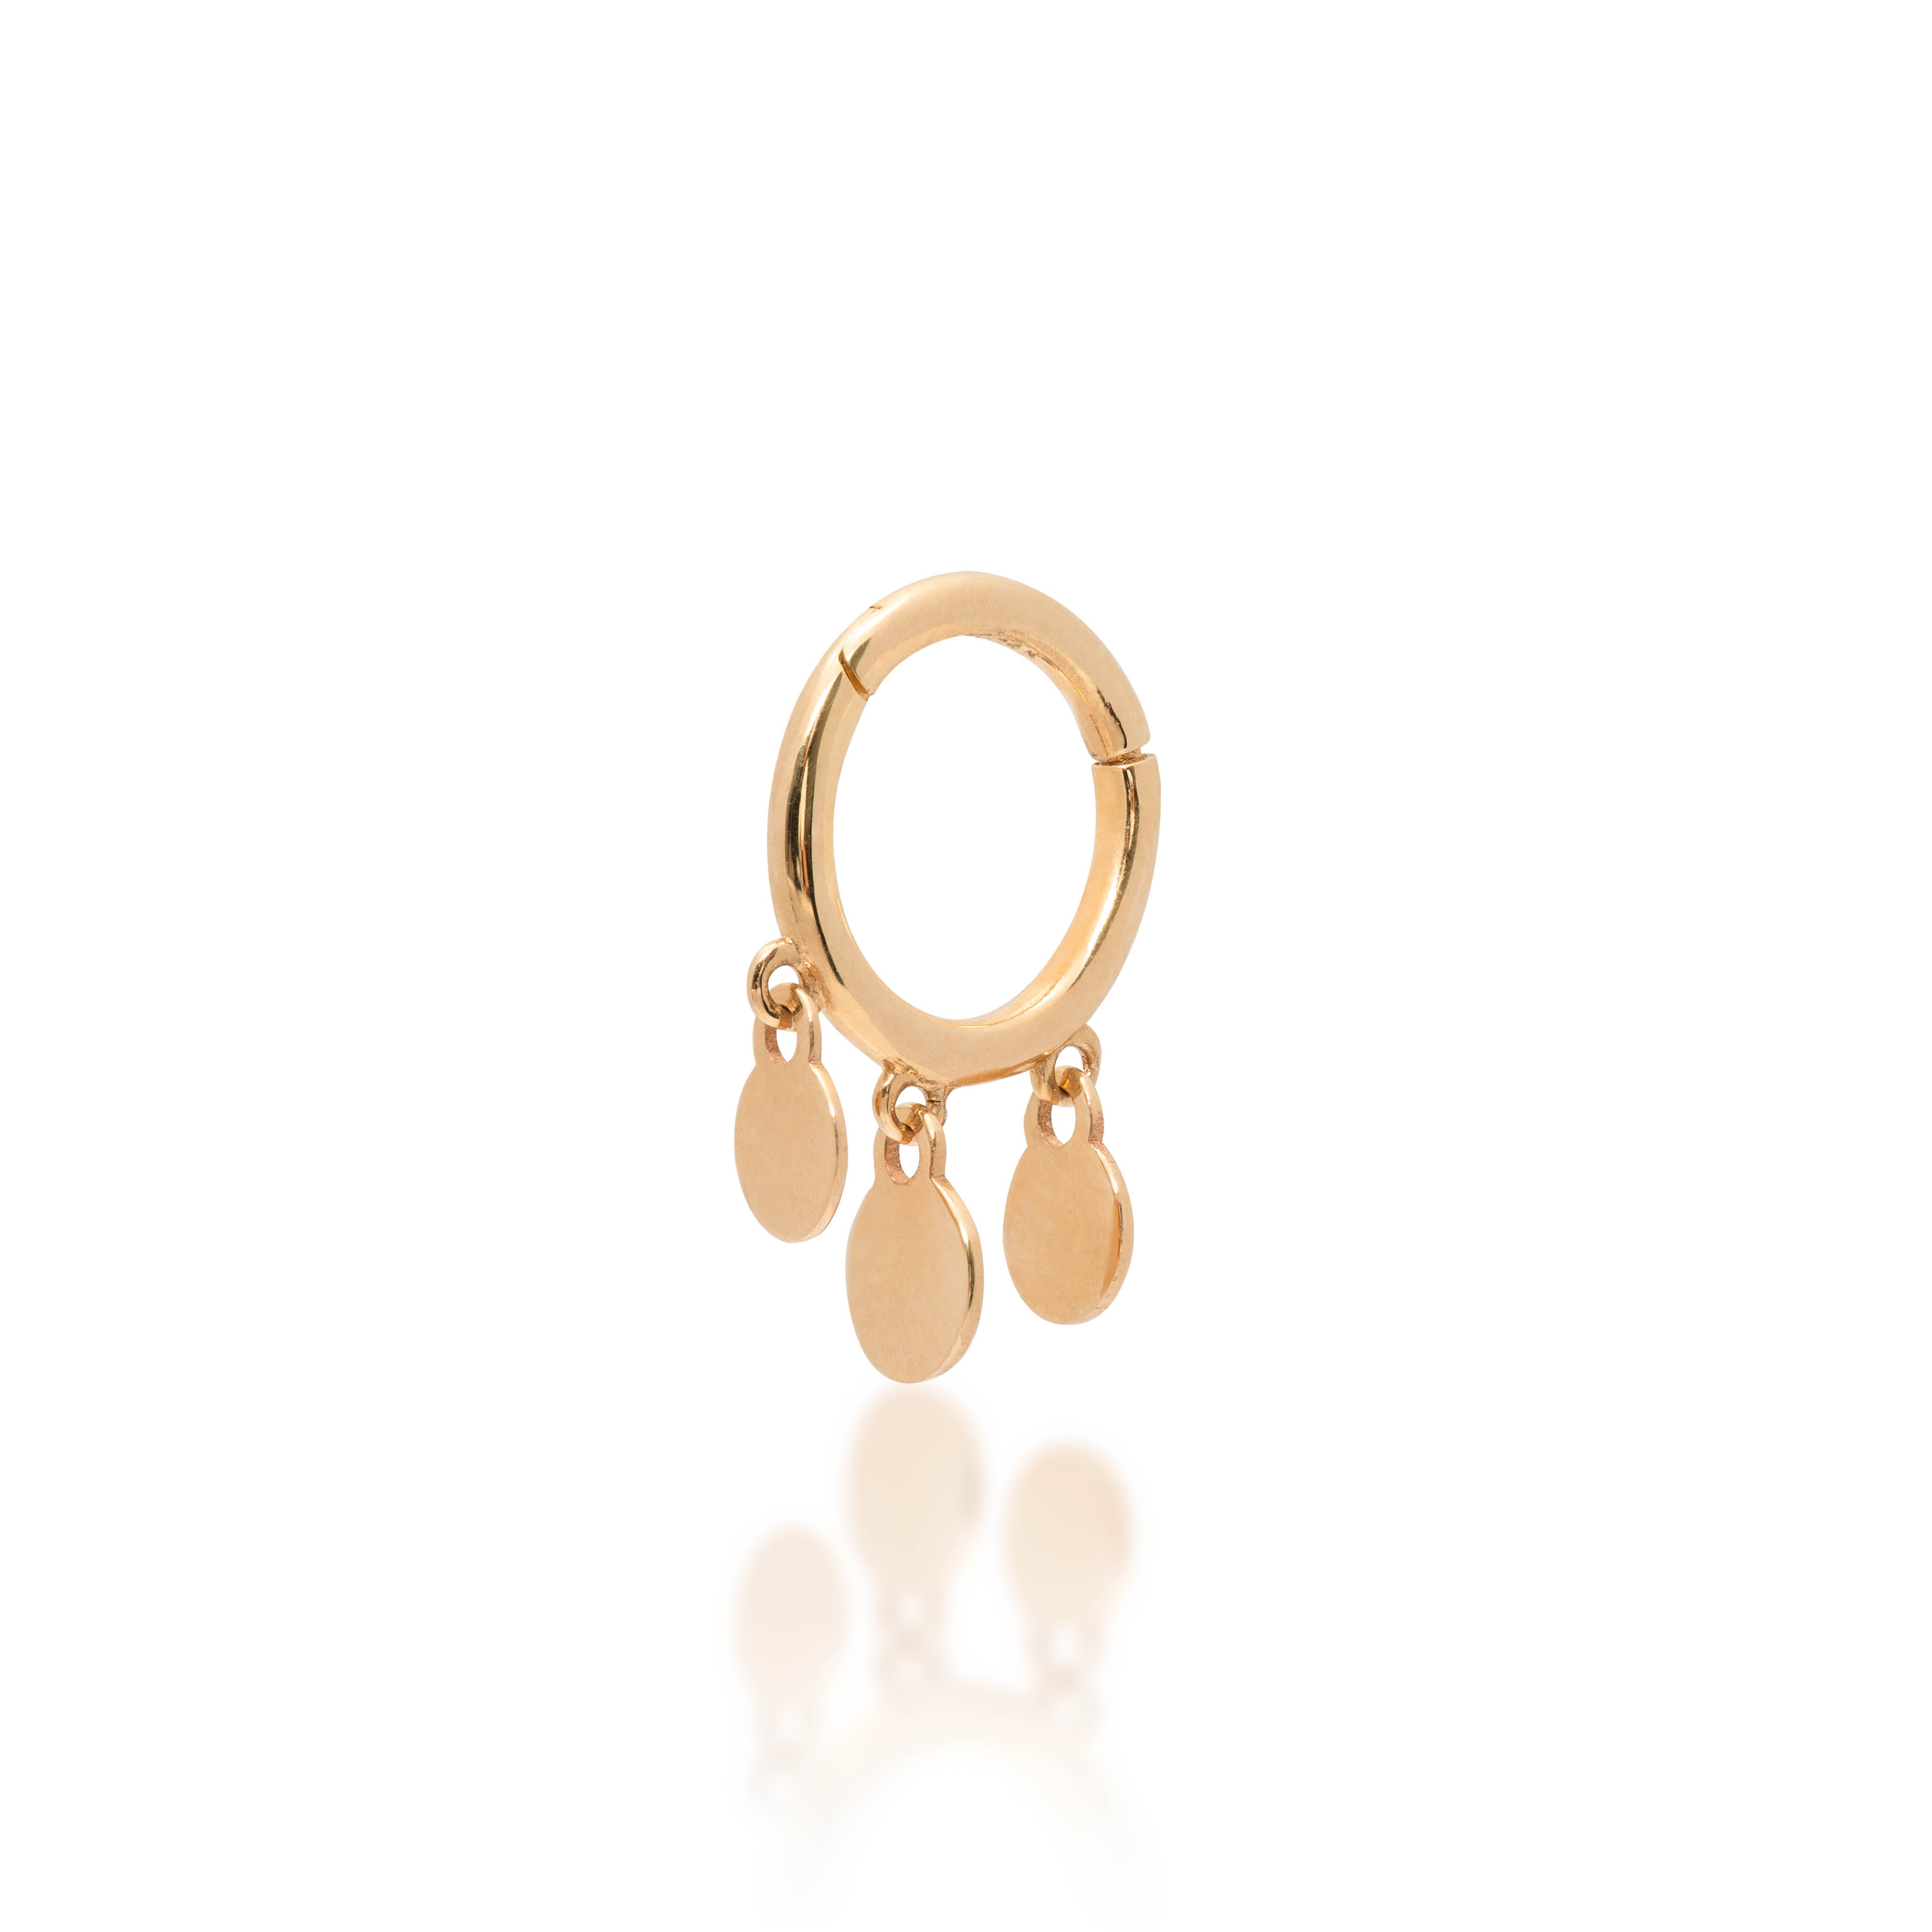 Charming Melody 14K Solid Yellow Gold Earring